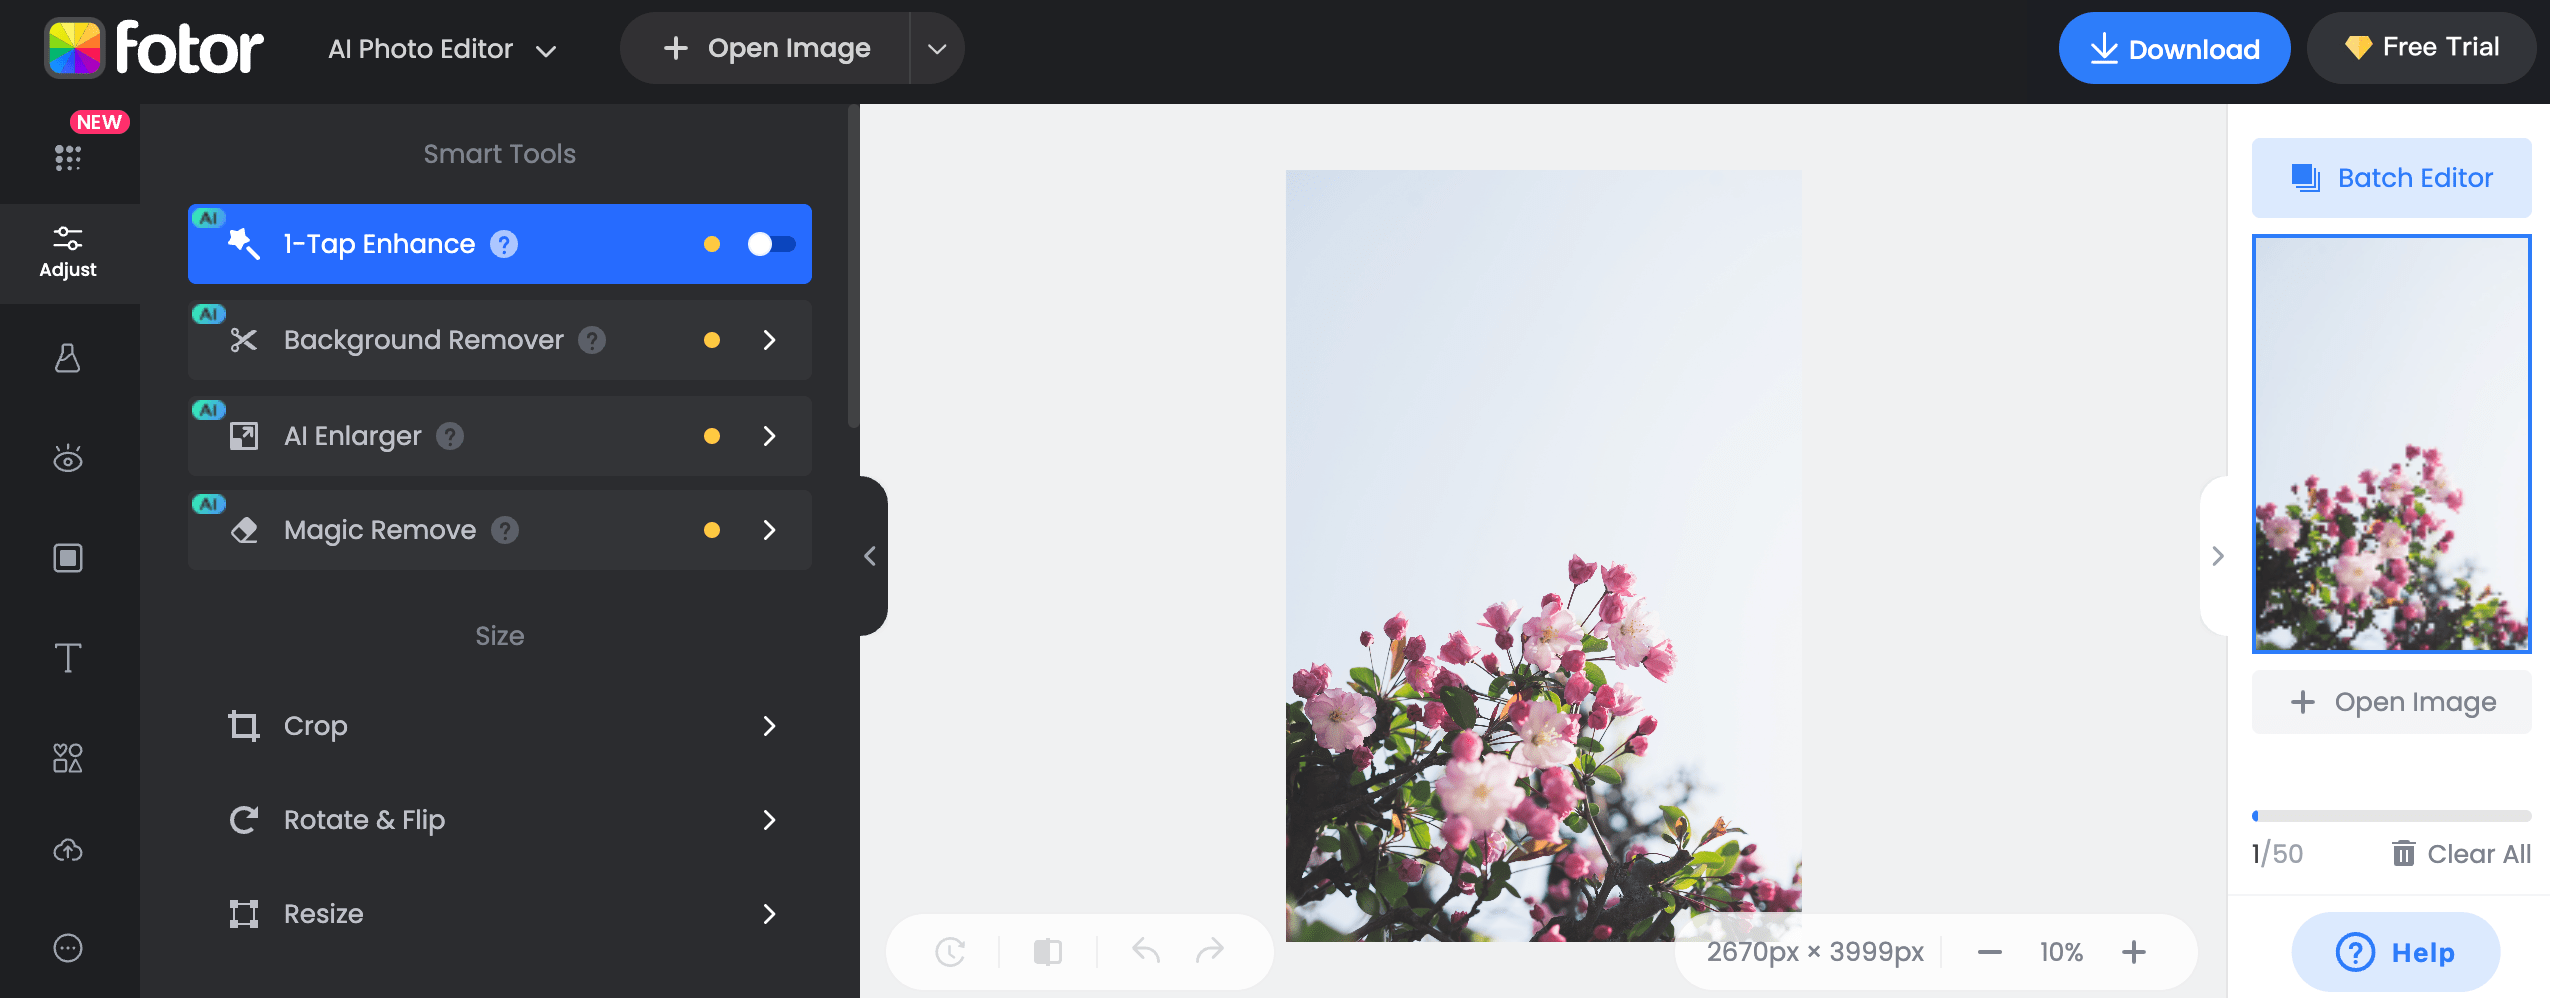 Fotor's interface, a free graphic design tool for photo editing 